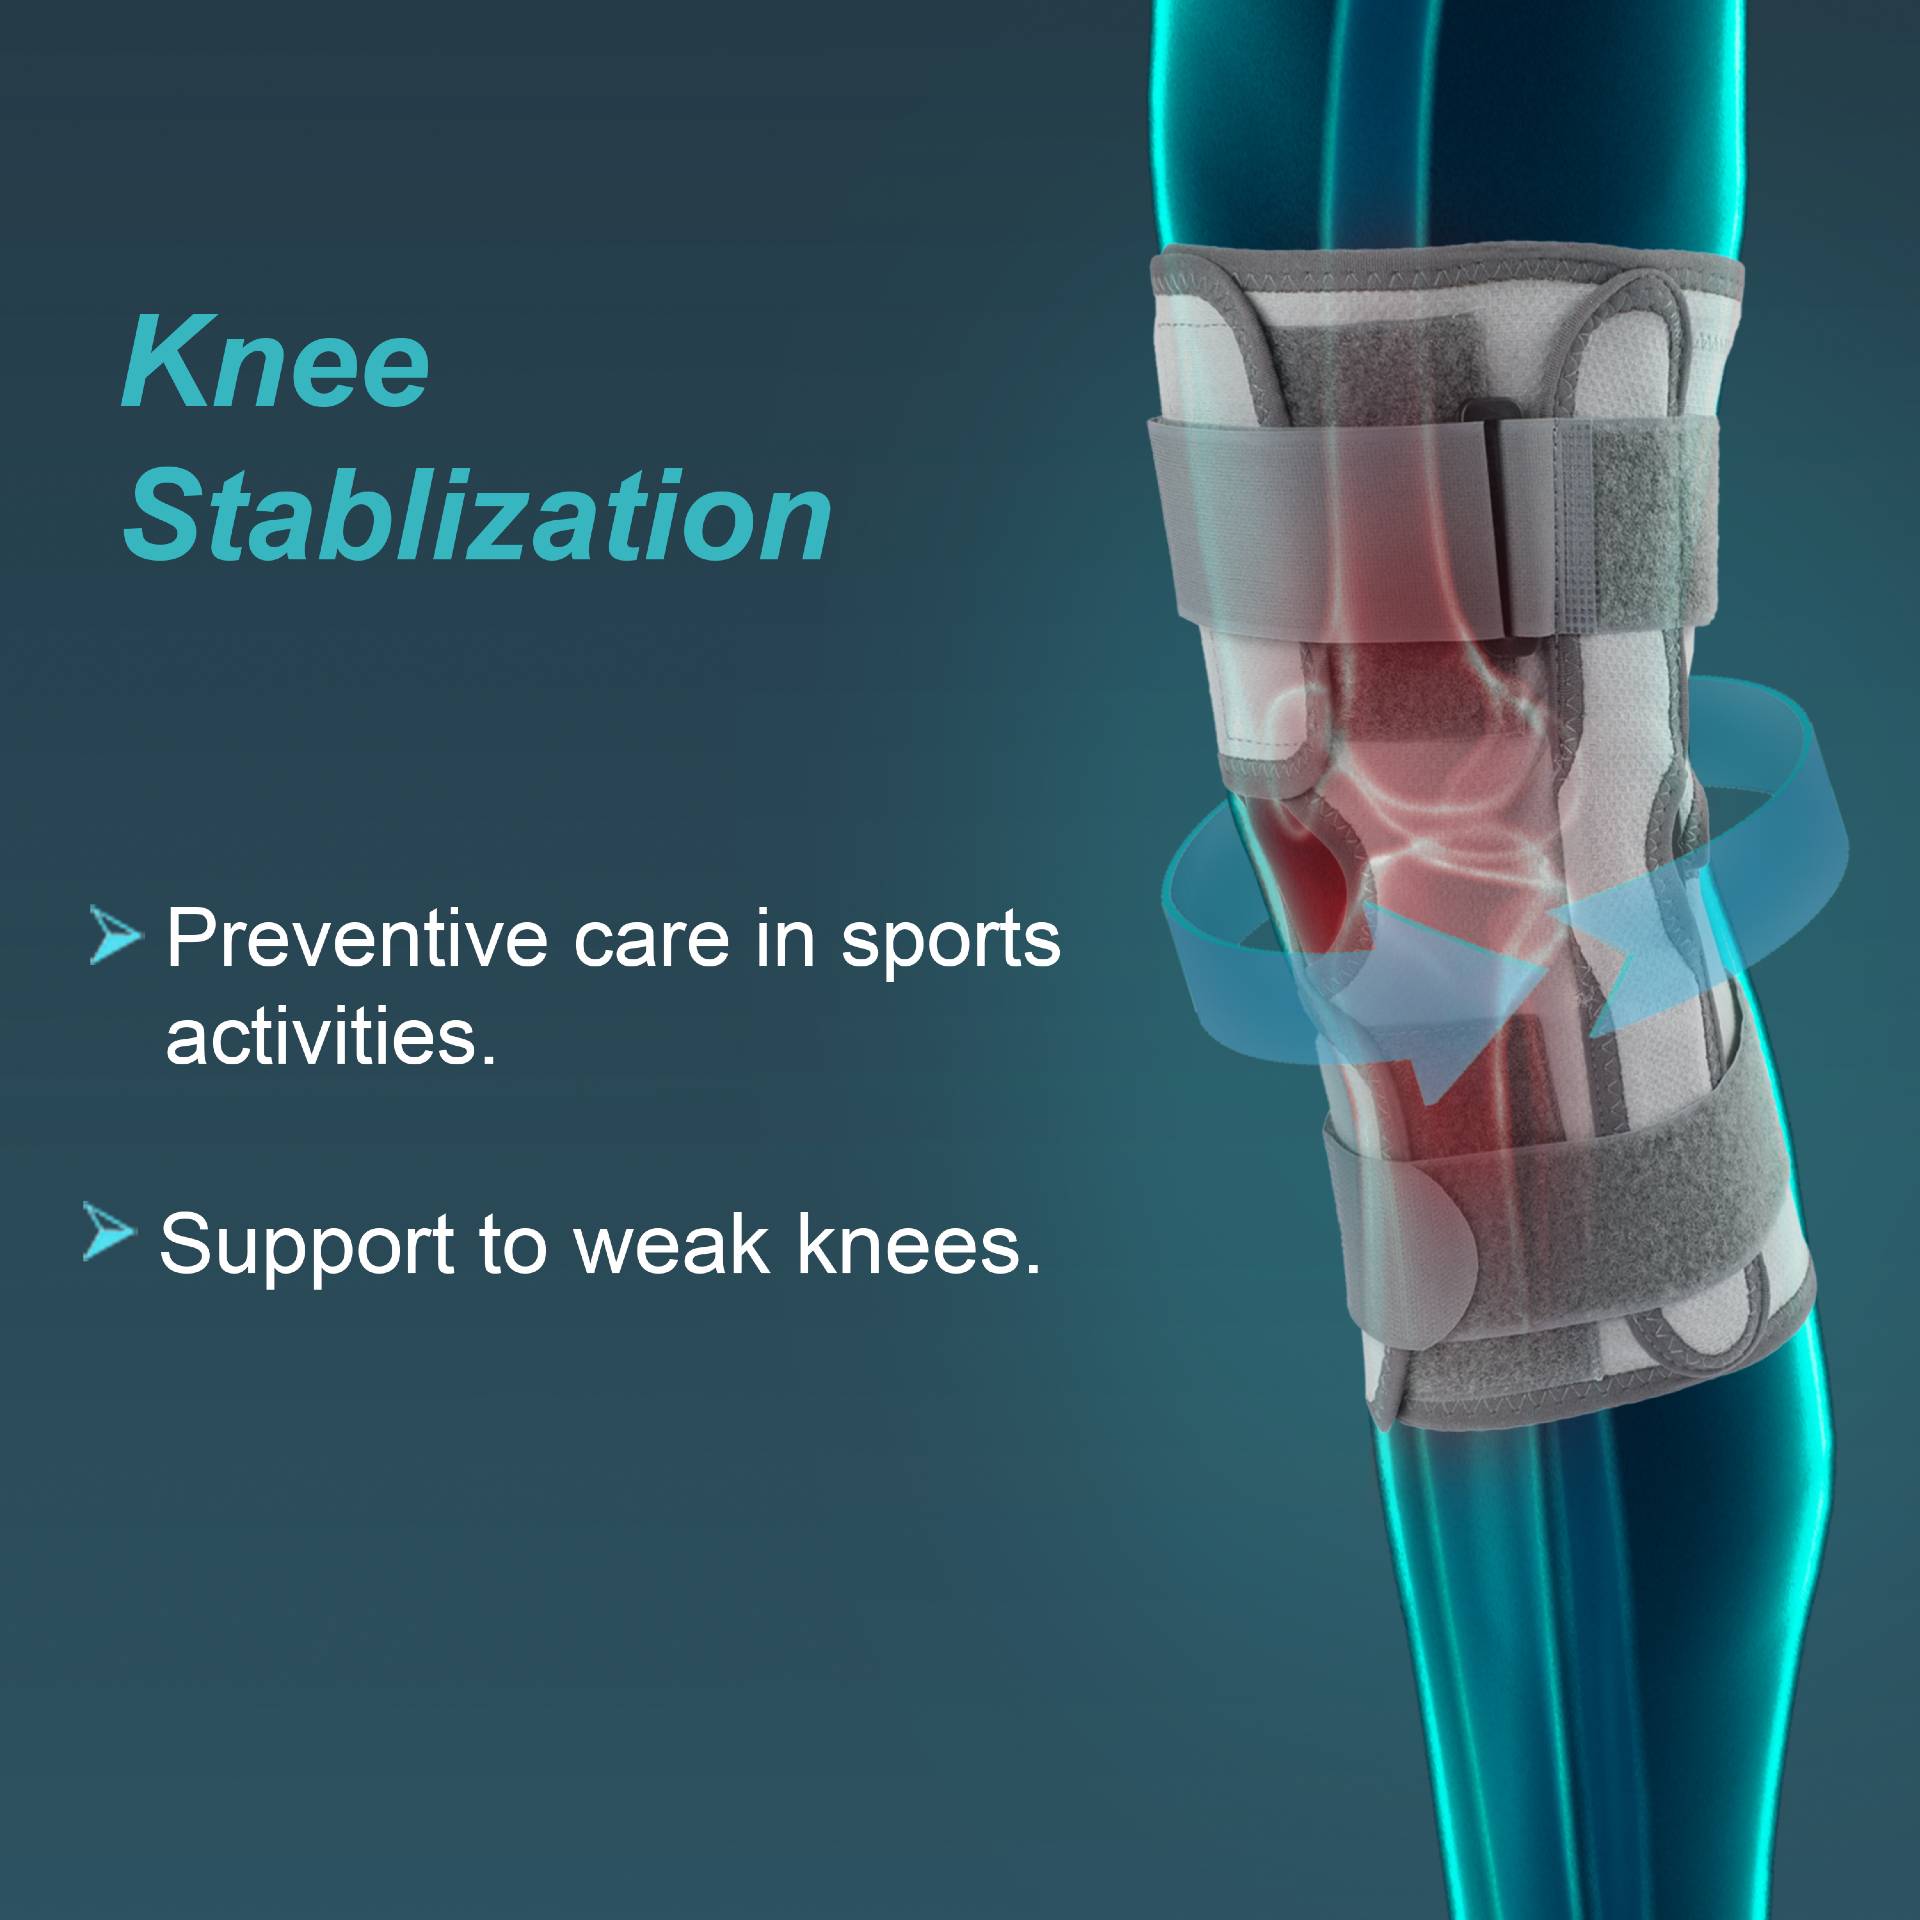 https://surgicalshoppe.co.in/wp-content/uploads/2021/10/functional-knee-support.jpg